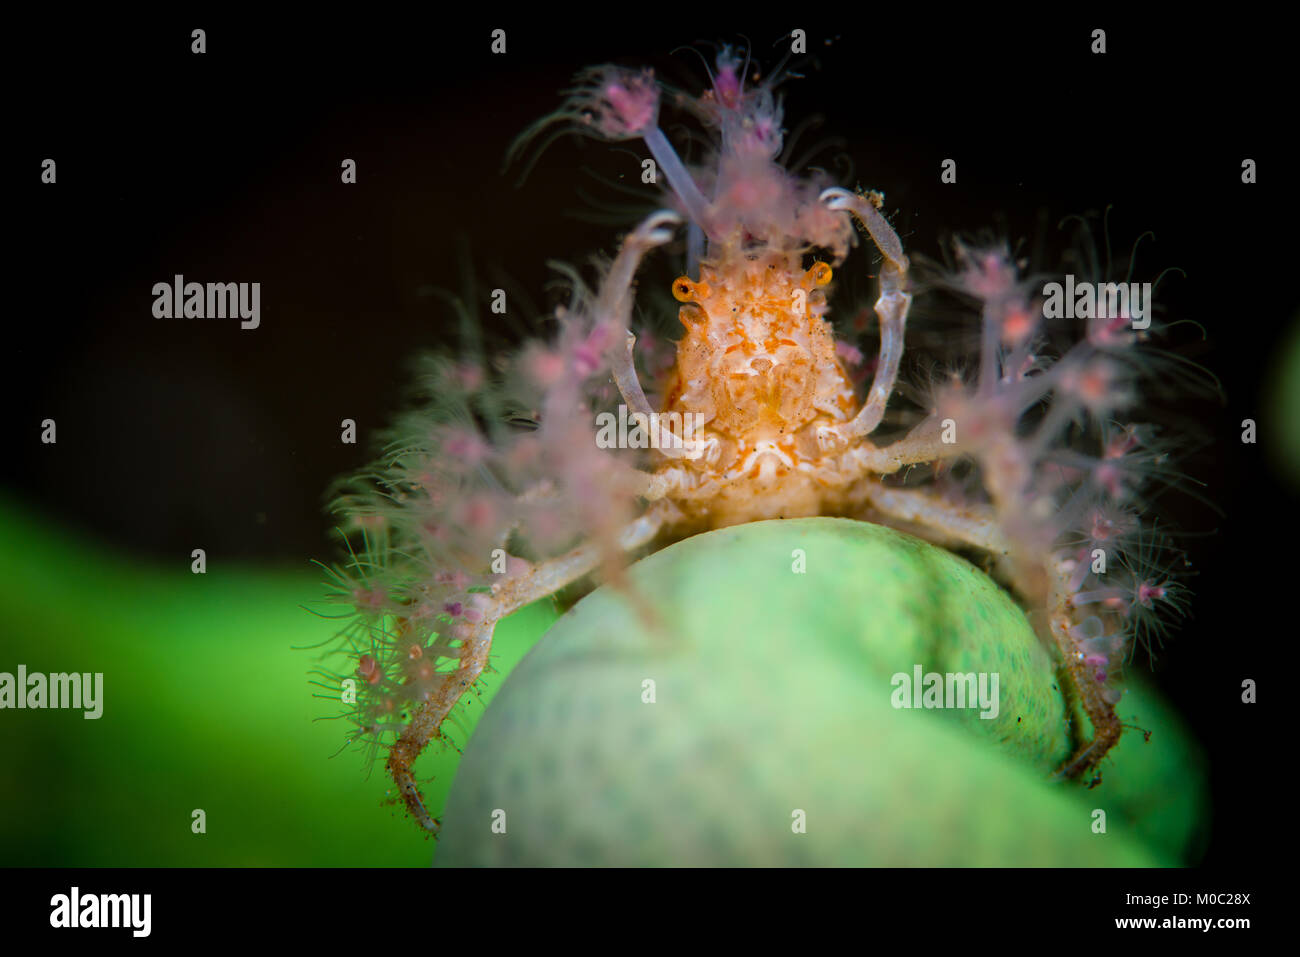 A Decorator crab during a night dive in Komodo National Park, sitting on a green lettuce coral from which is taking corals to be placed on it body Stock Photo